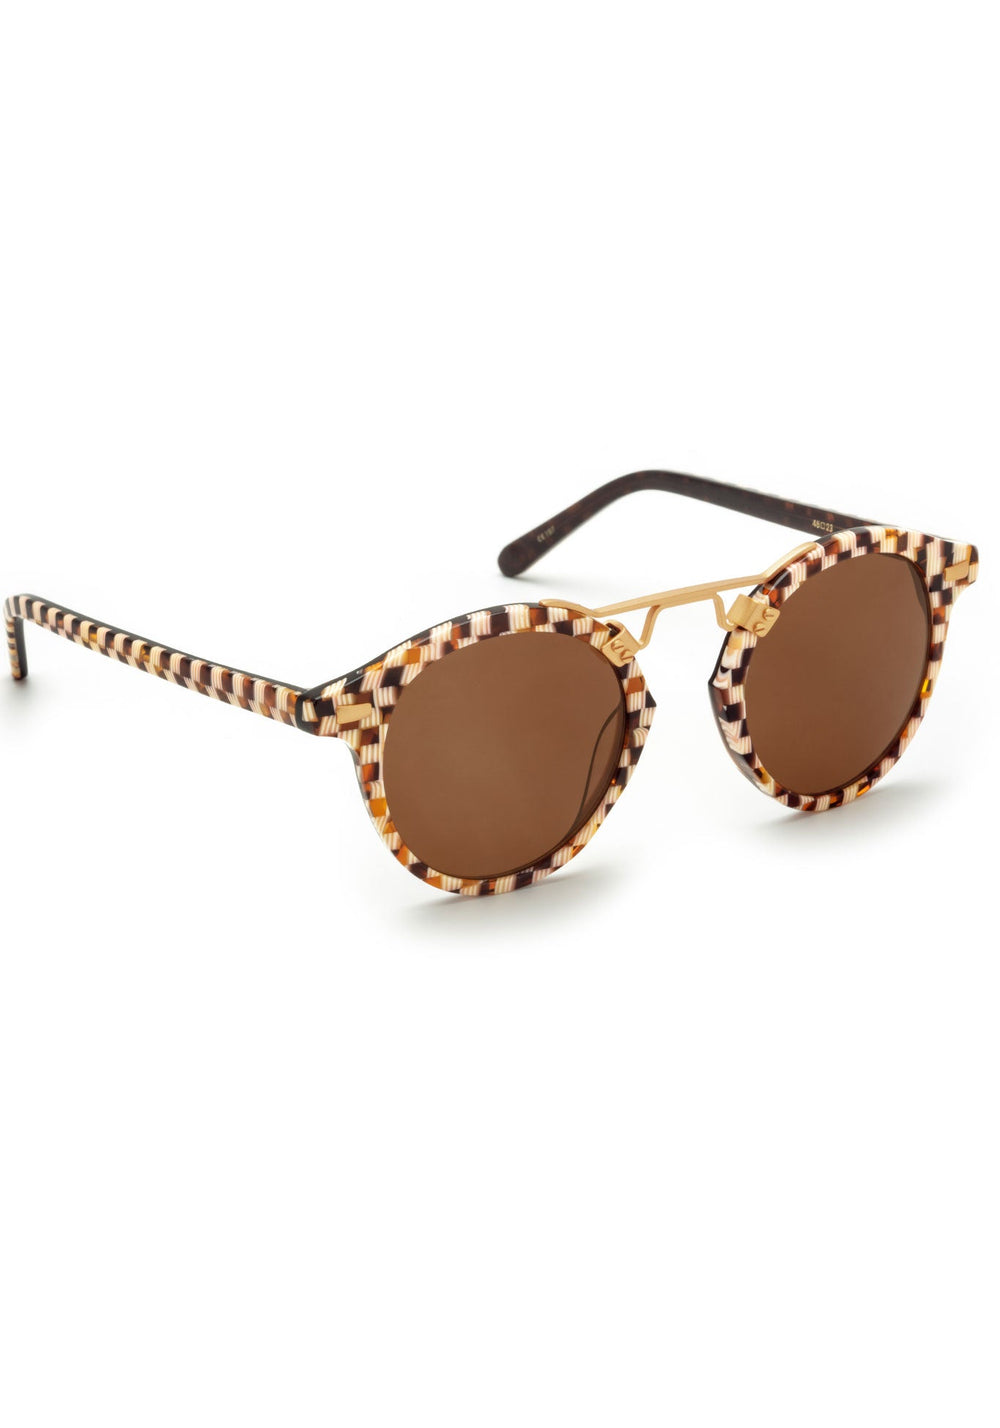 KREWE ST. LOUIS CLASSICS | Caffe Dolce 24K Handcrafted, luxury, checkered acetate KREWE sunglasses